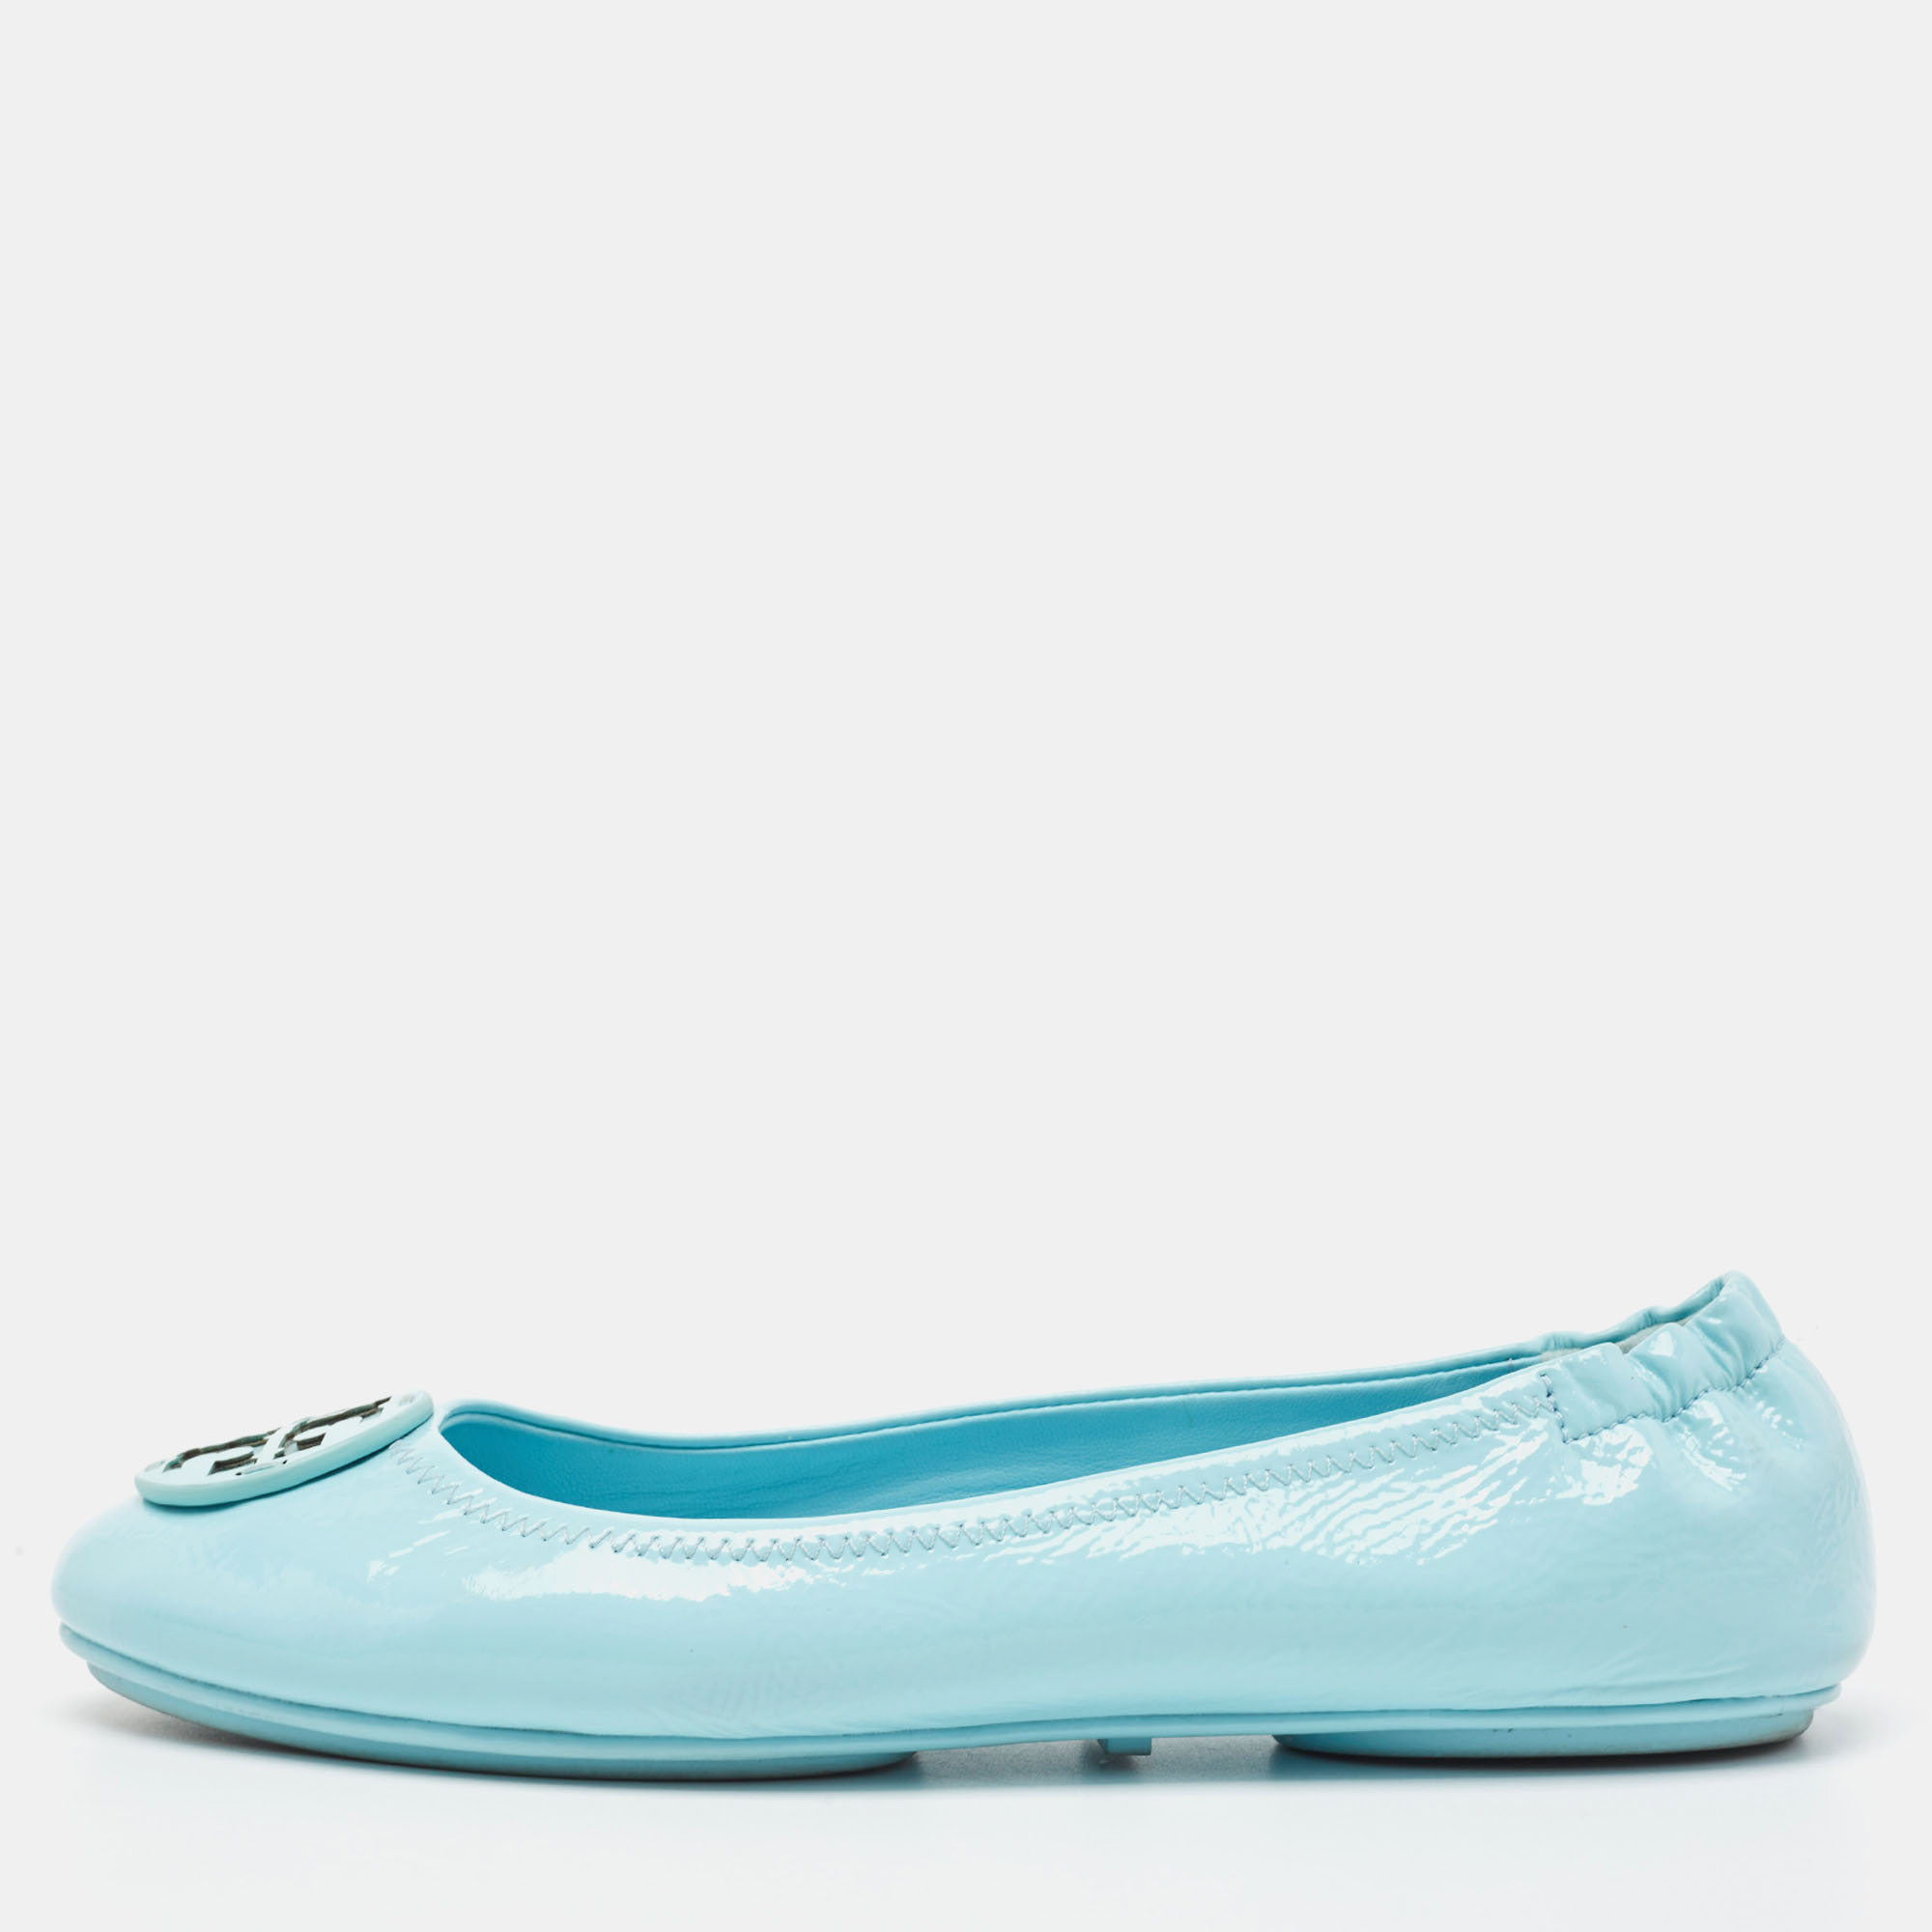 Tory Burch Blue Patent Leather Minnie Travel Ballet Flats Size 39